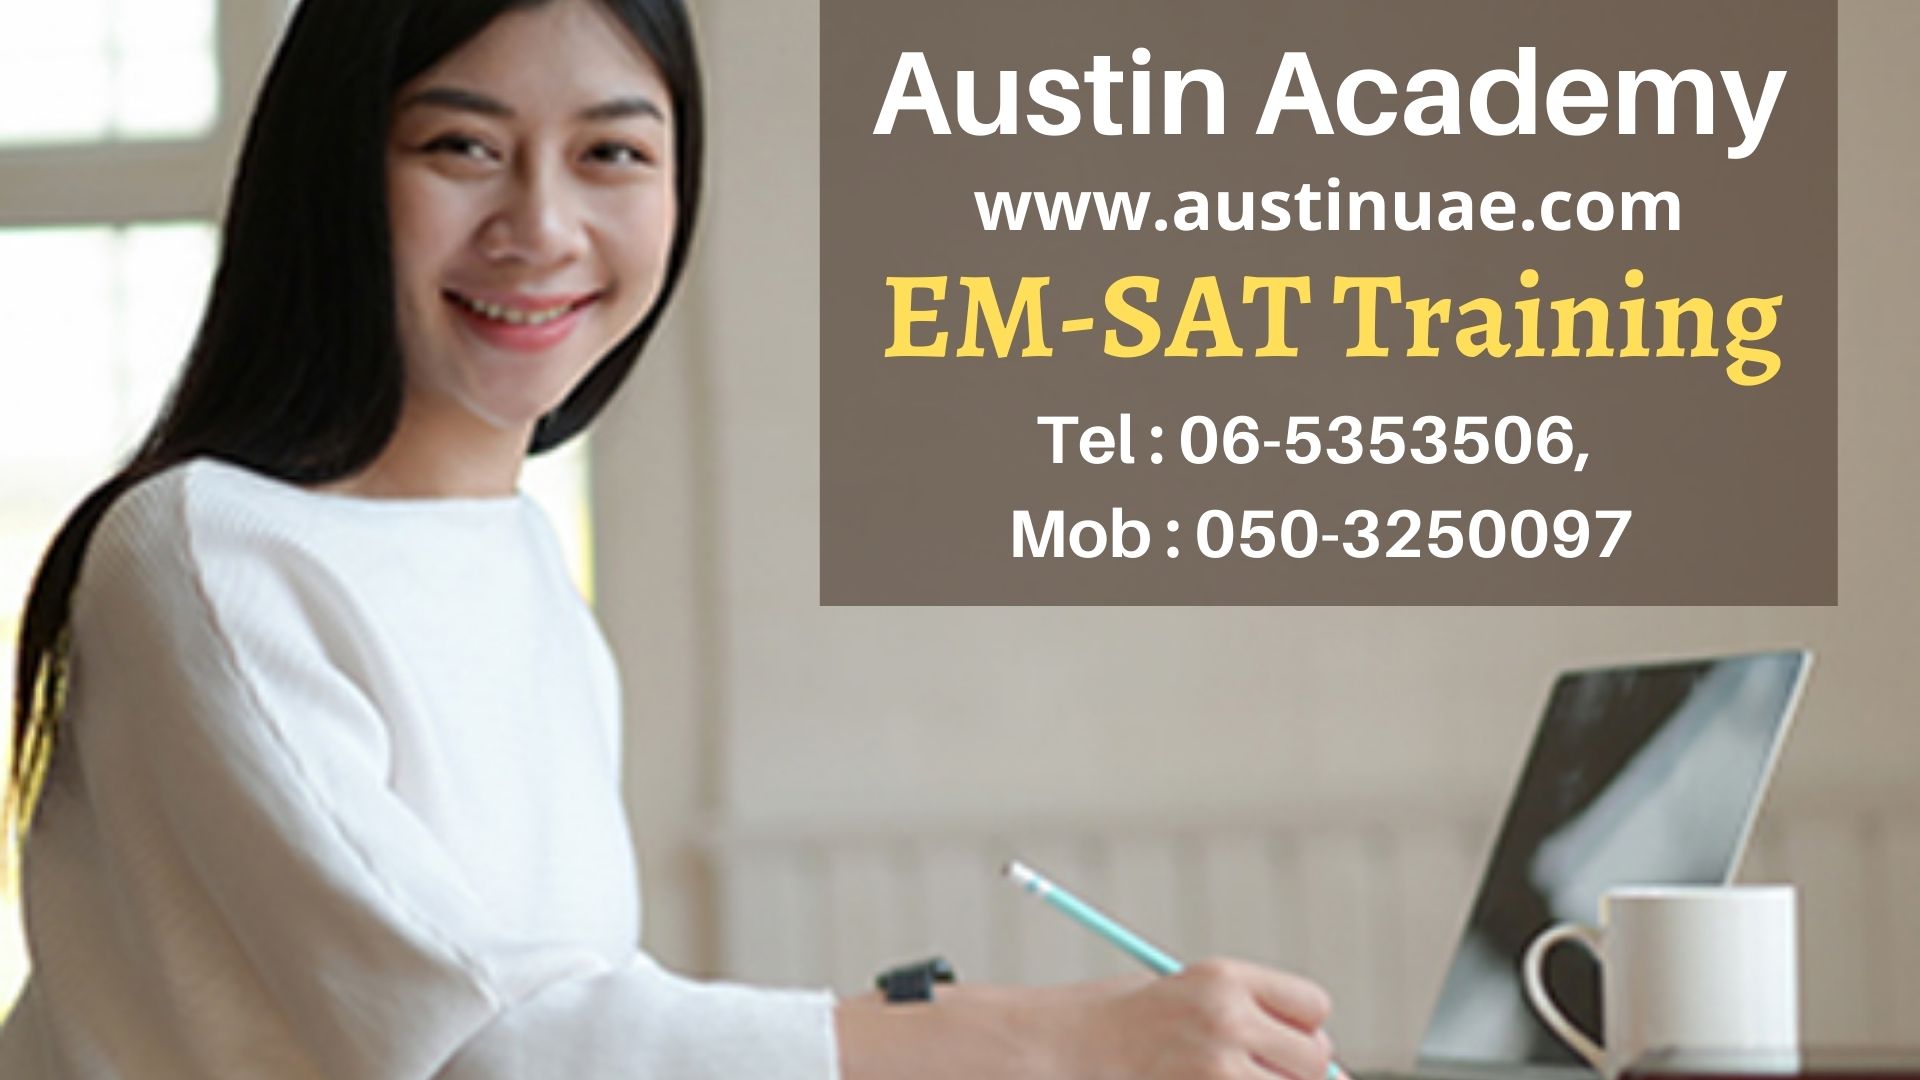 Emsat Training In Sharjah With Great Offer 0588197415